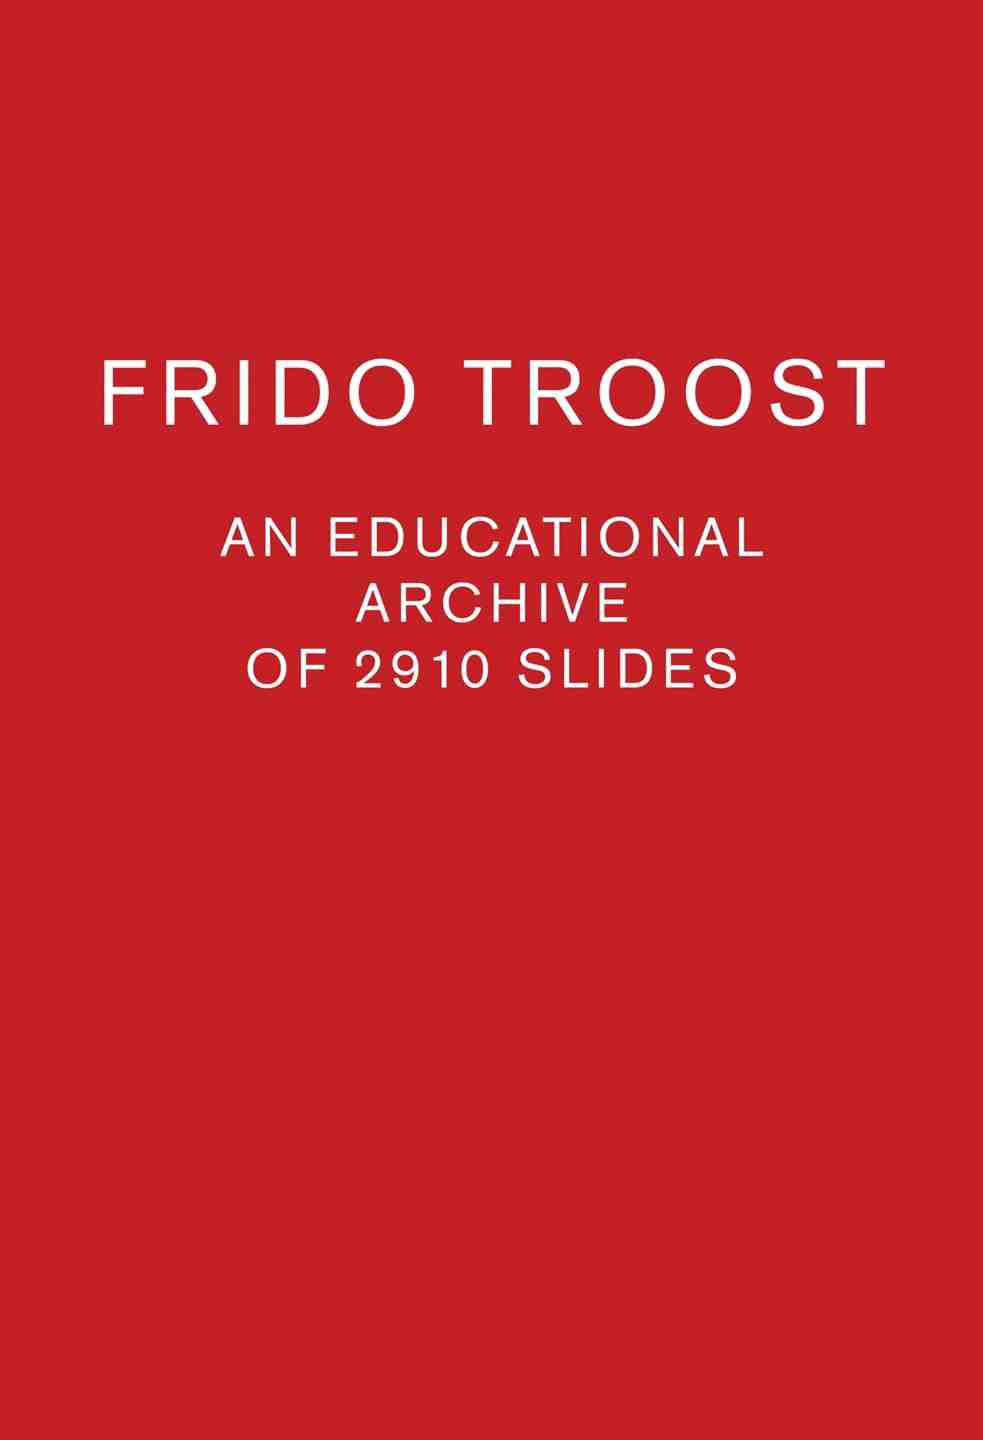 An educational archive of 2863 slides by Frido Troost - Tipi bookshop